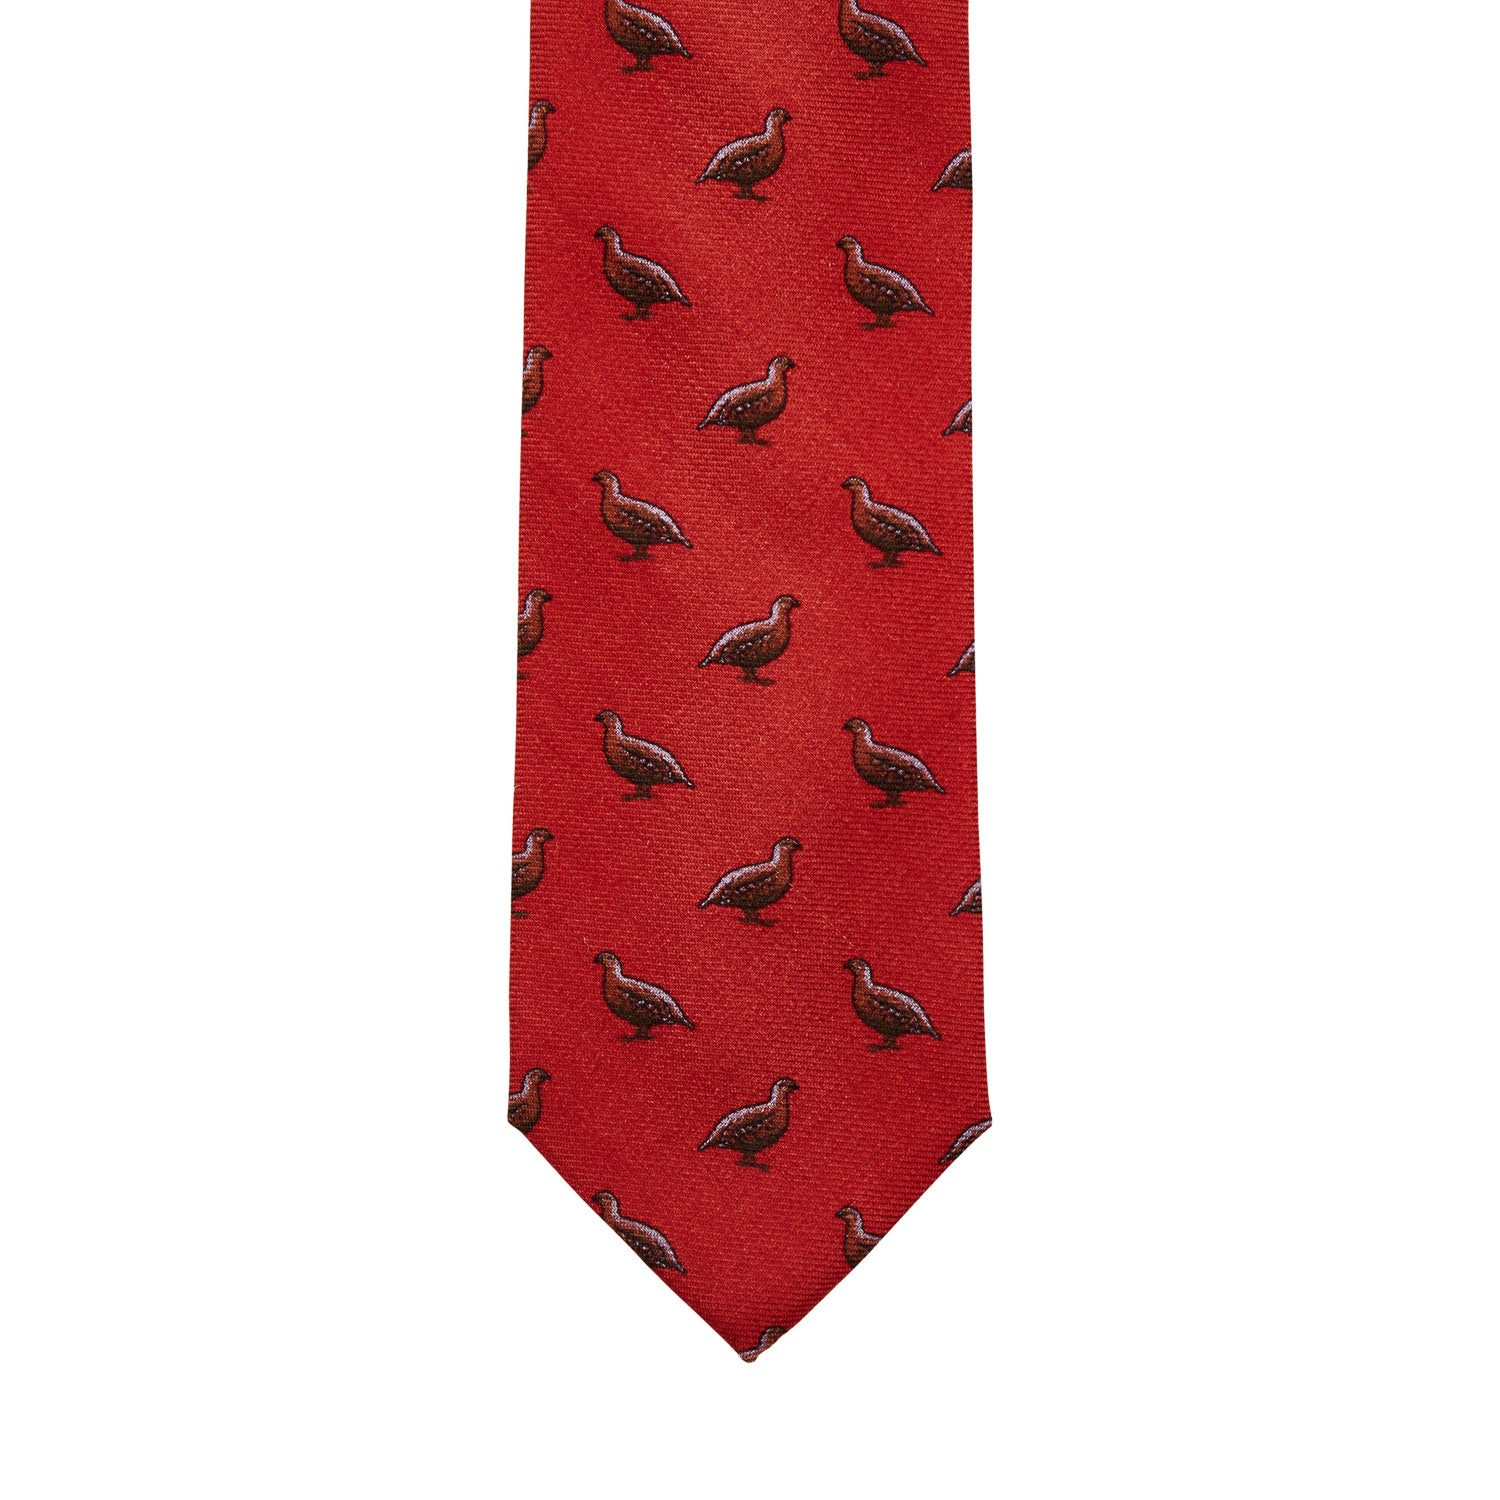 A handmade Sovereign Grade 100% Wool Regency Quail Shooting Tie with birds on it, made of 100% English silk, from KirbyAllison.com.